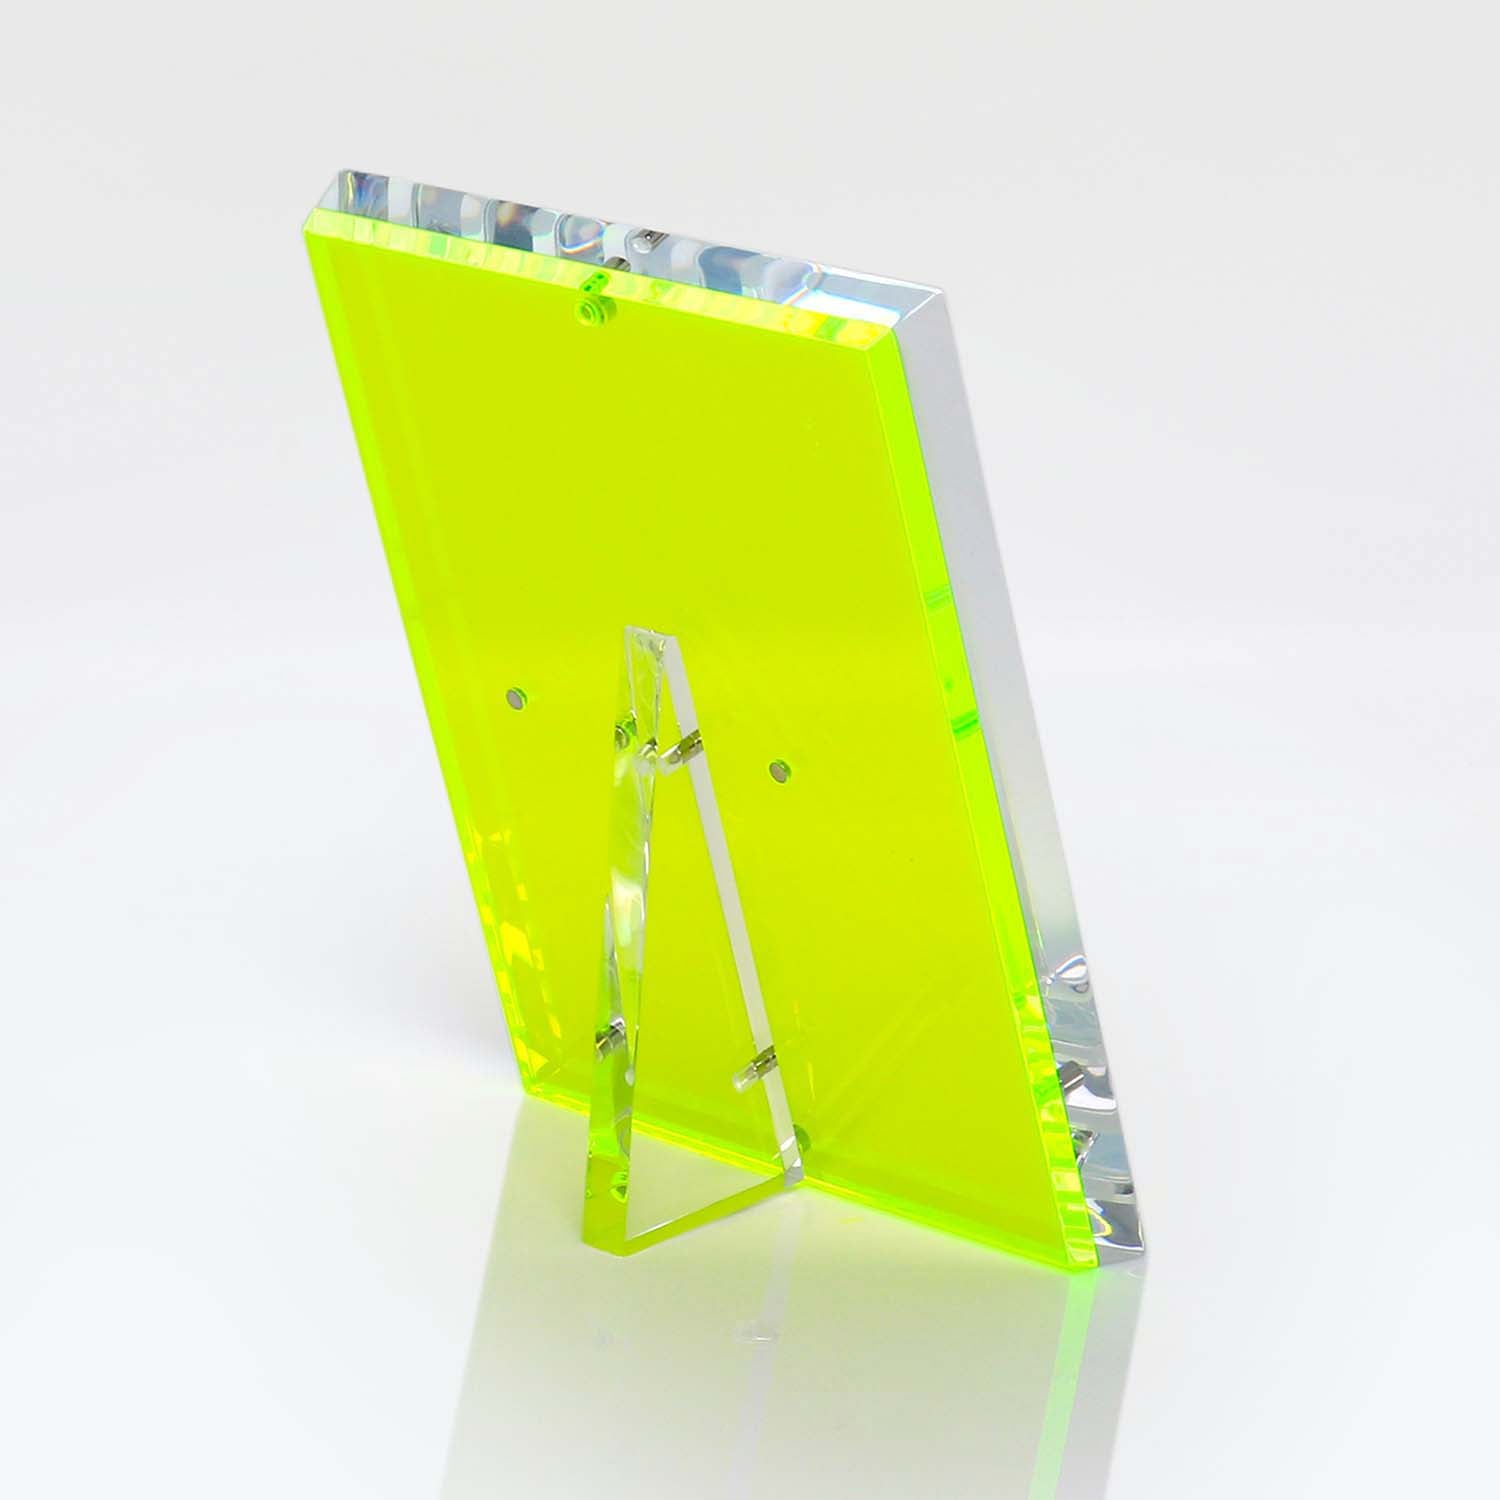 Fluorescent yellow acrylic 'A' award with glossy finish and backlighting